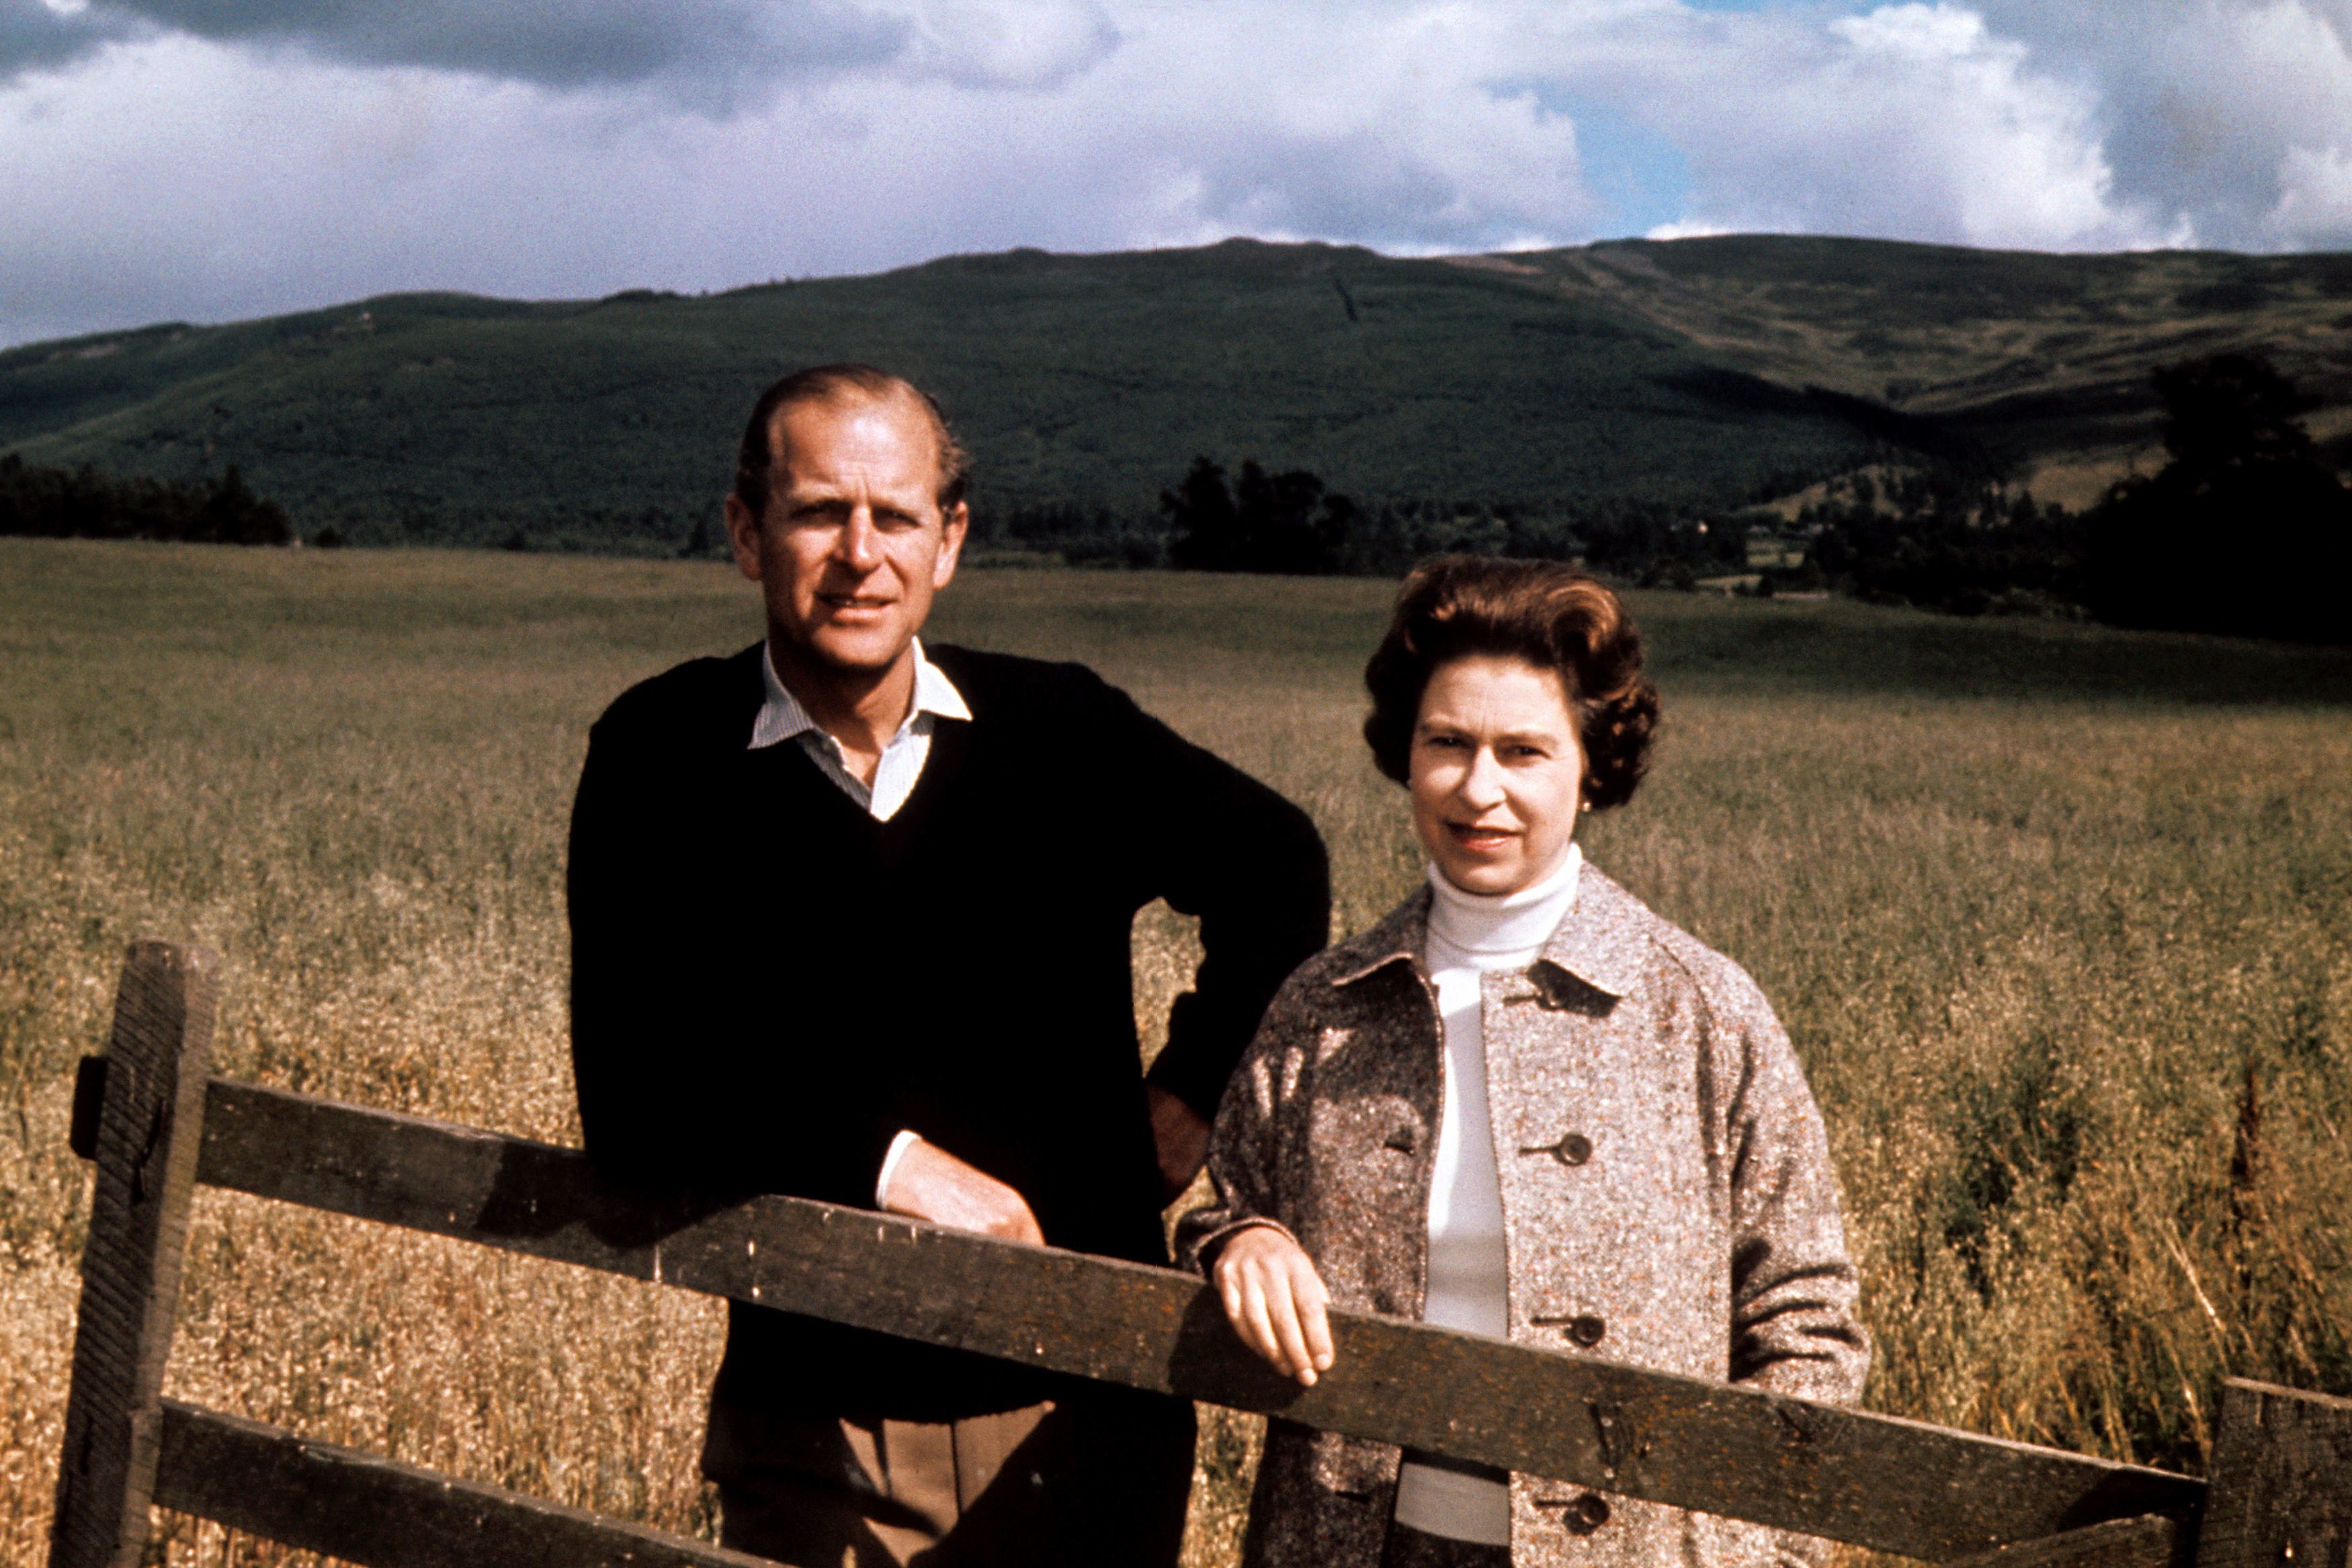 File photo dated 01/09/72 of Queen Elizabeth II and the Duke of Edinburgh at Balmoral to celebrate their Silver Wedding anniversary. Balmoral in the Highlands, one of the royals’ favourite places, held many memories for the Duke of Edinburgh. The Queen was once said to never be happier than when she was at Balmoral, Philip, too, loved the outdoor life that was synonymous with their annual break, which stretched from the end of July into October. Issue date: Friday April 4, 2021.